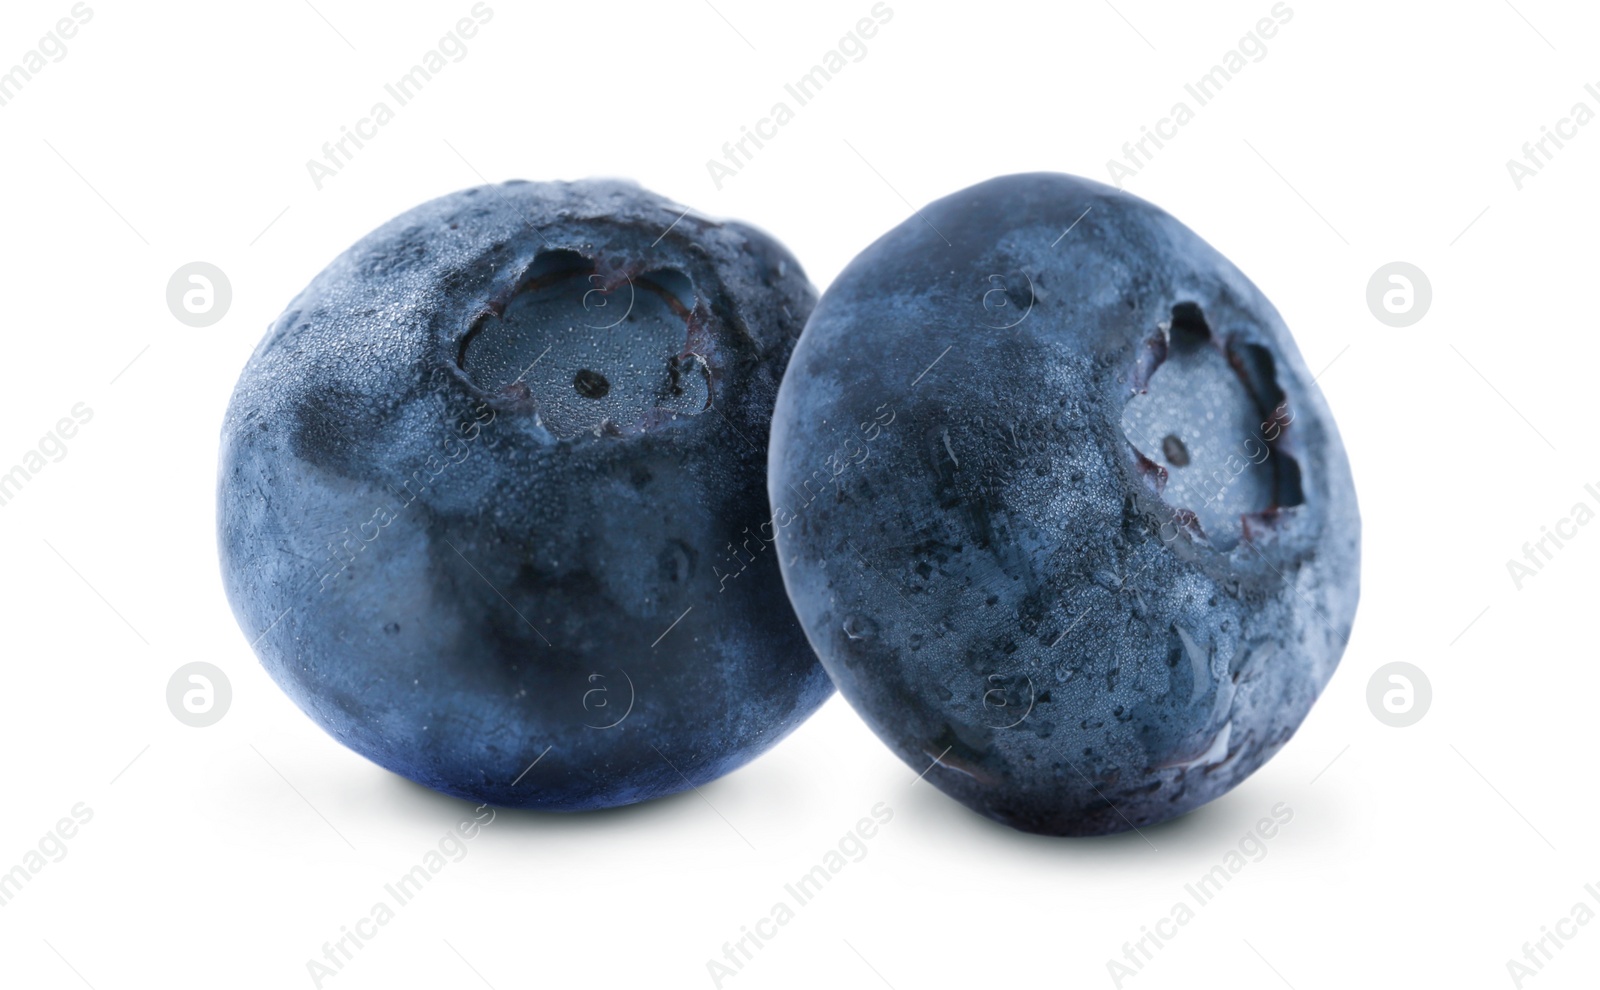 Image of Two whole ripe blueberries on white background